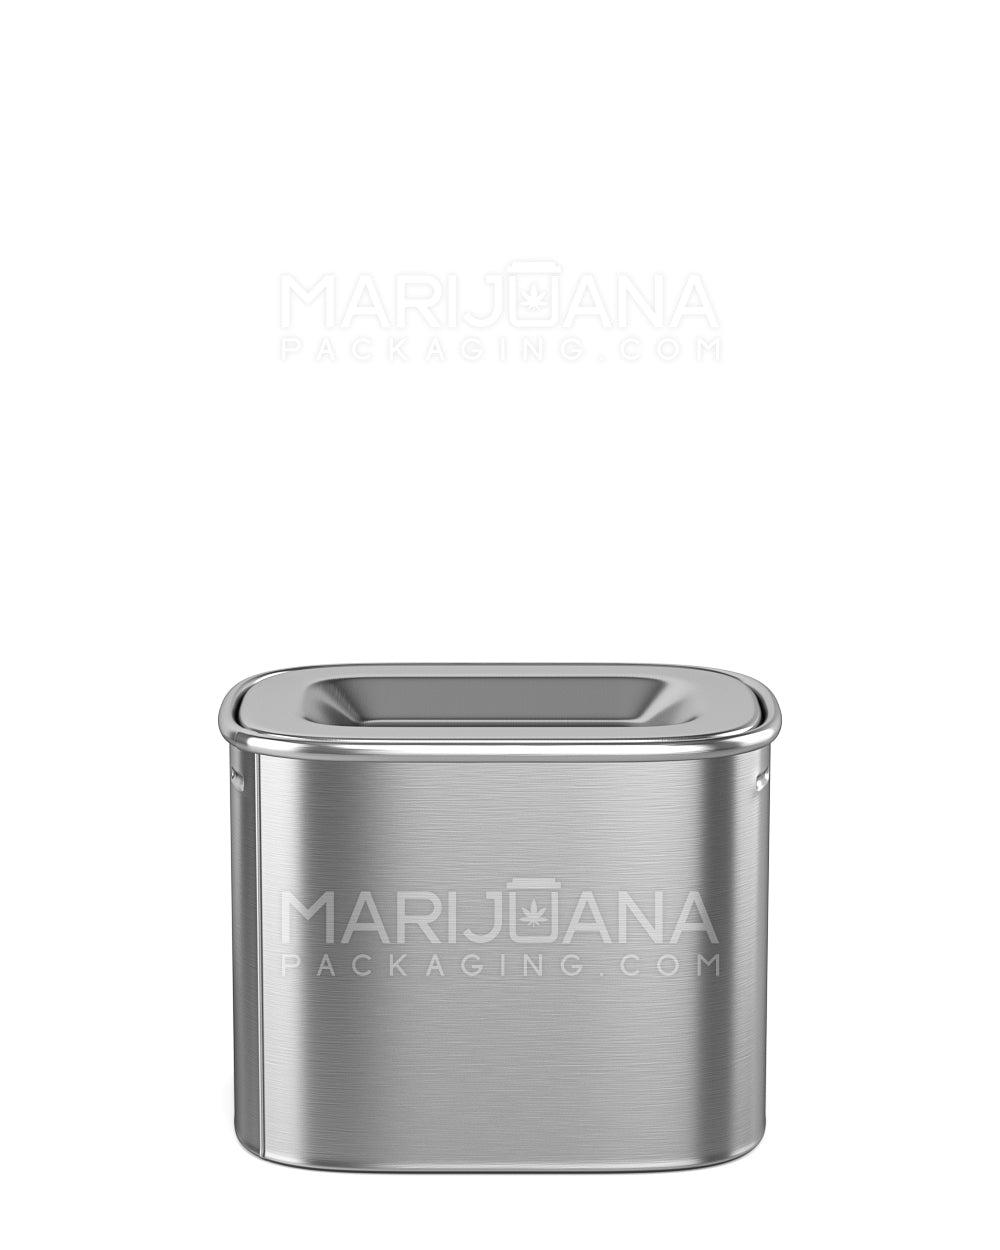 Child Resistant & Sustainable | 100% Recyclable PushTin Medium Container | 2oz - Silver Tin - 200 Count - 12